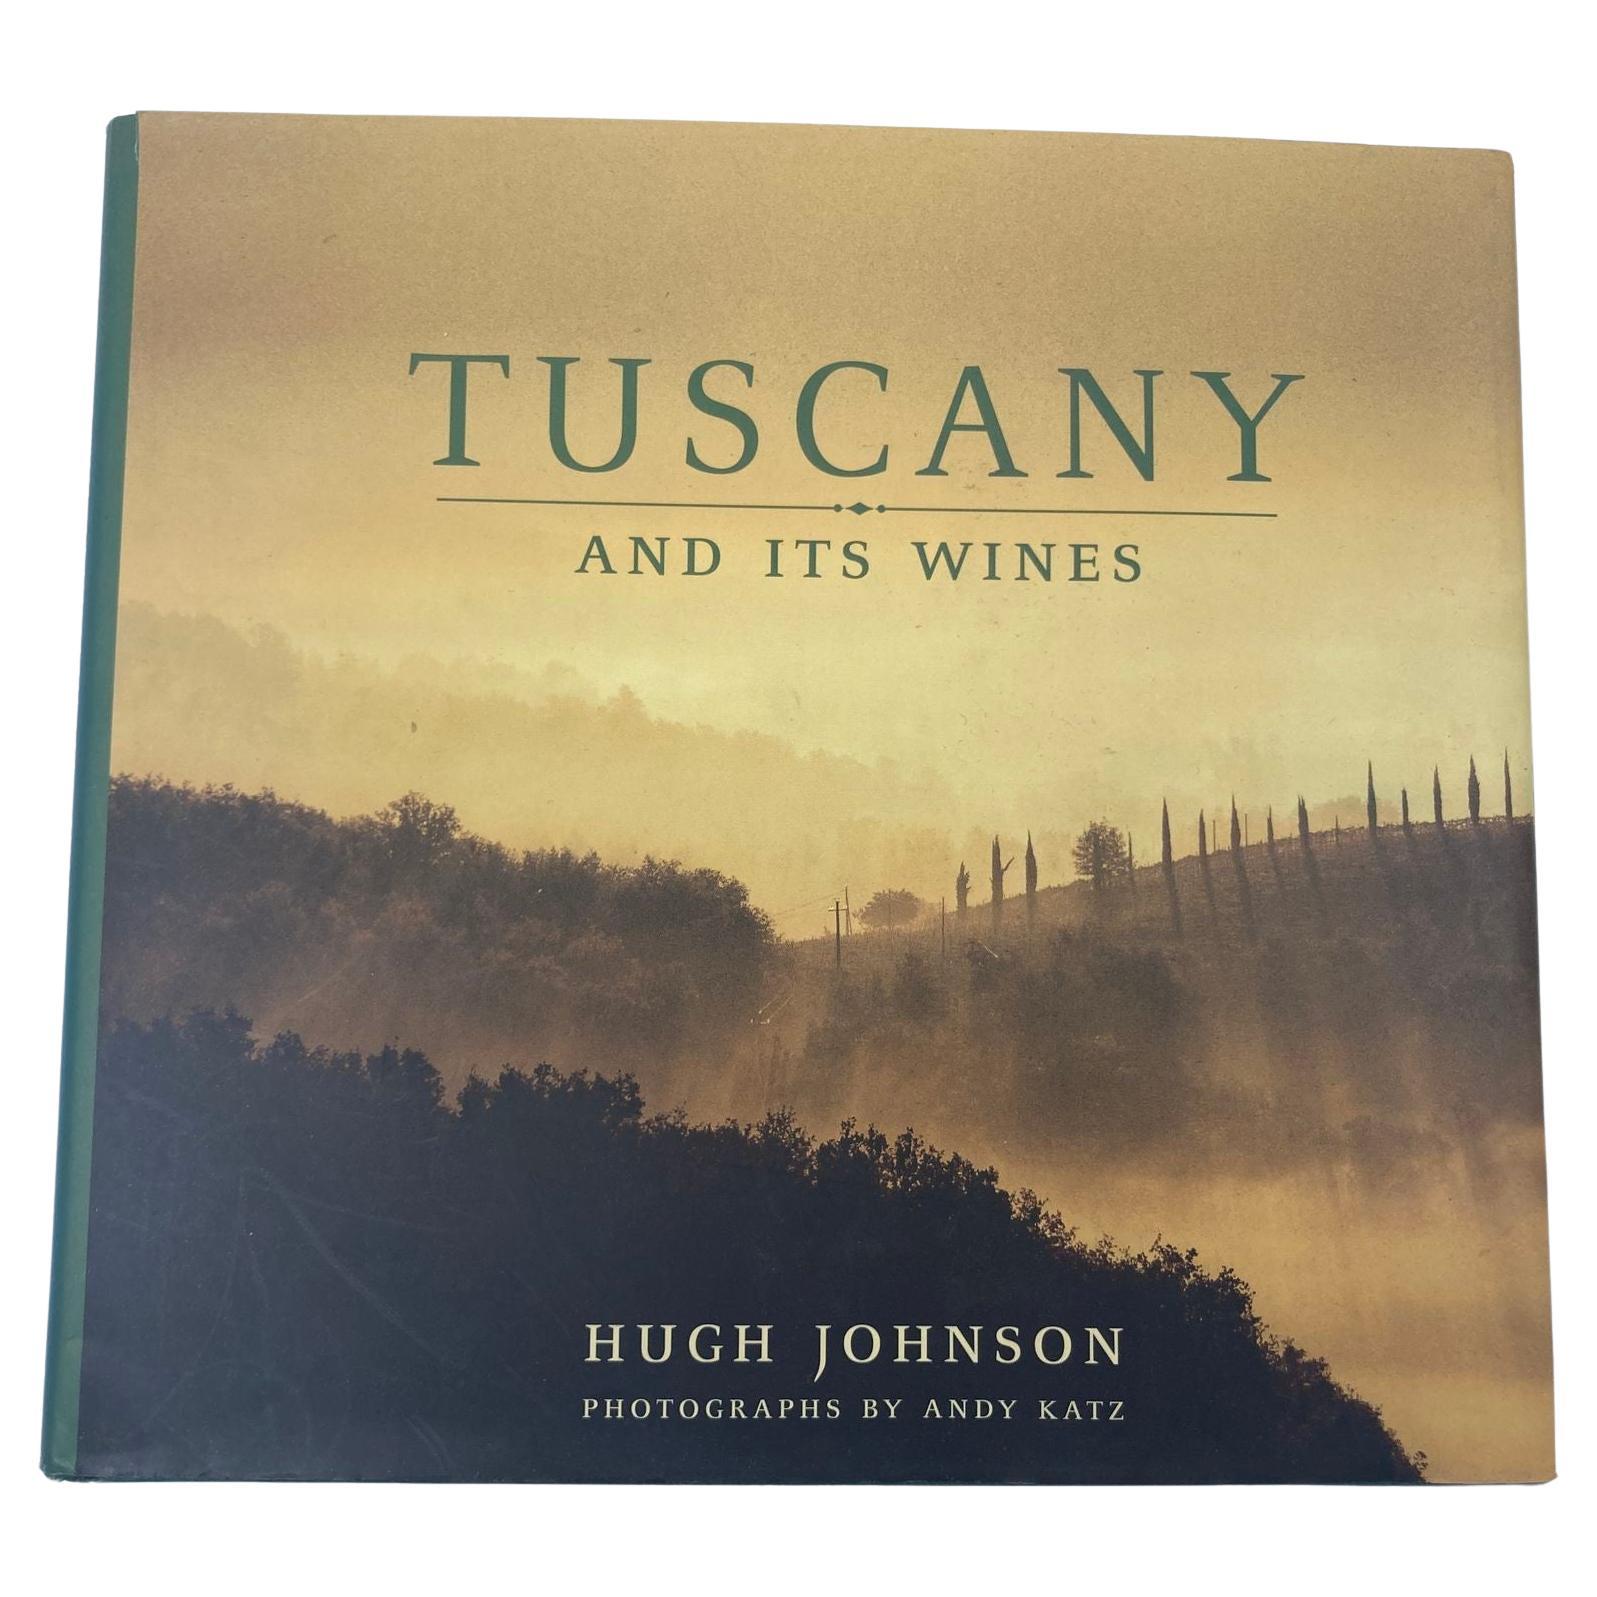 Tuscany and Its Wines by Hugh Johnson Livre à couverture rigide 2000